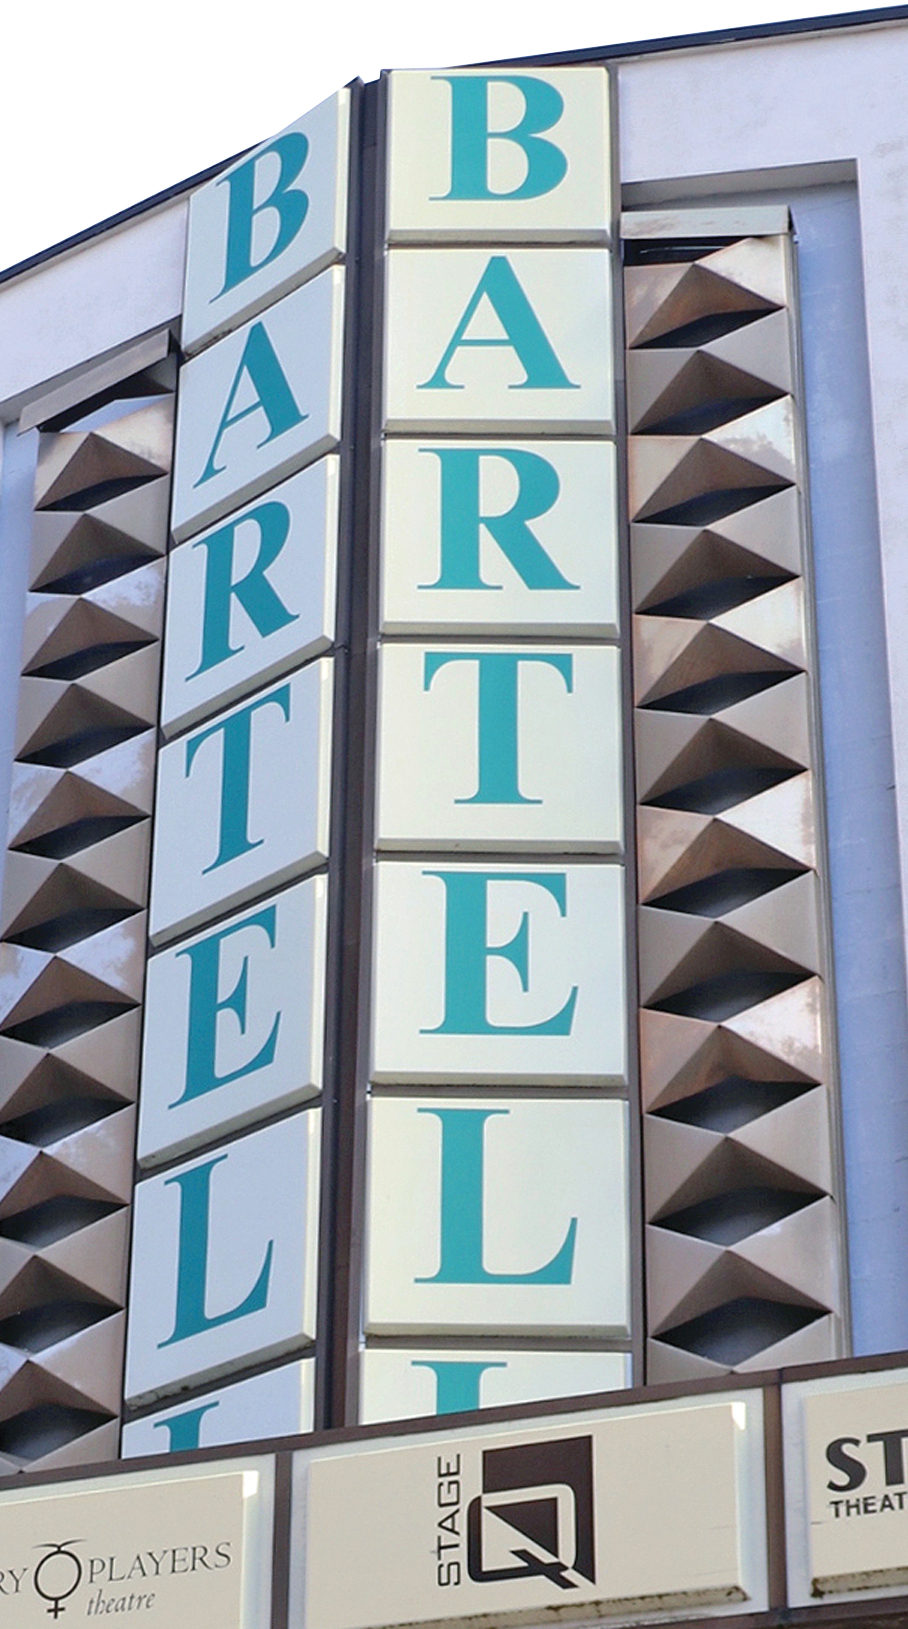 Building with a sign that reads "Bartell"